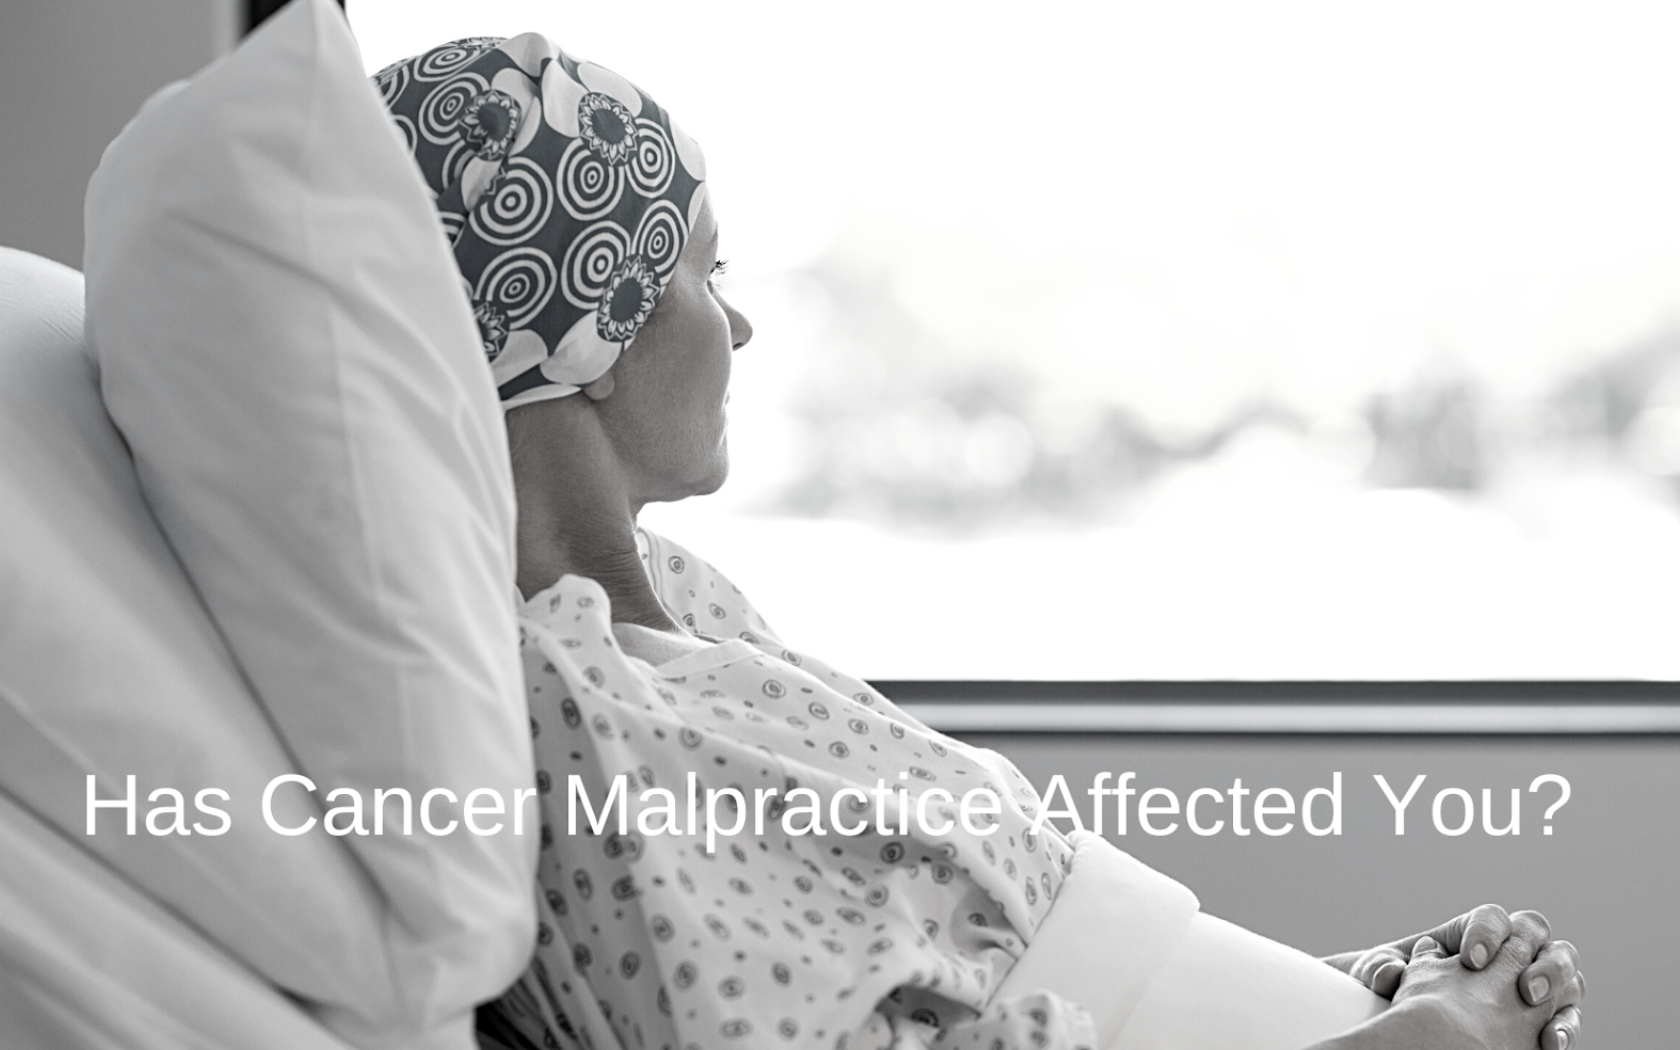 Cancer malpractice victim lies in hospital bed.